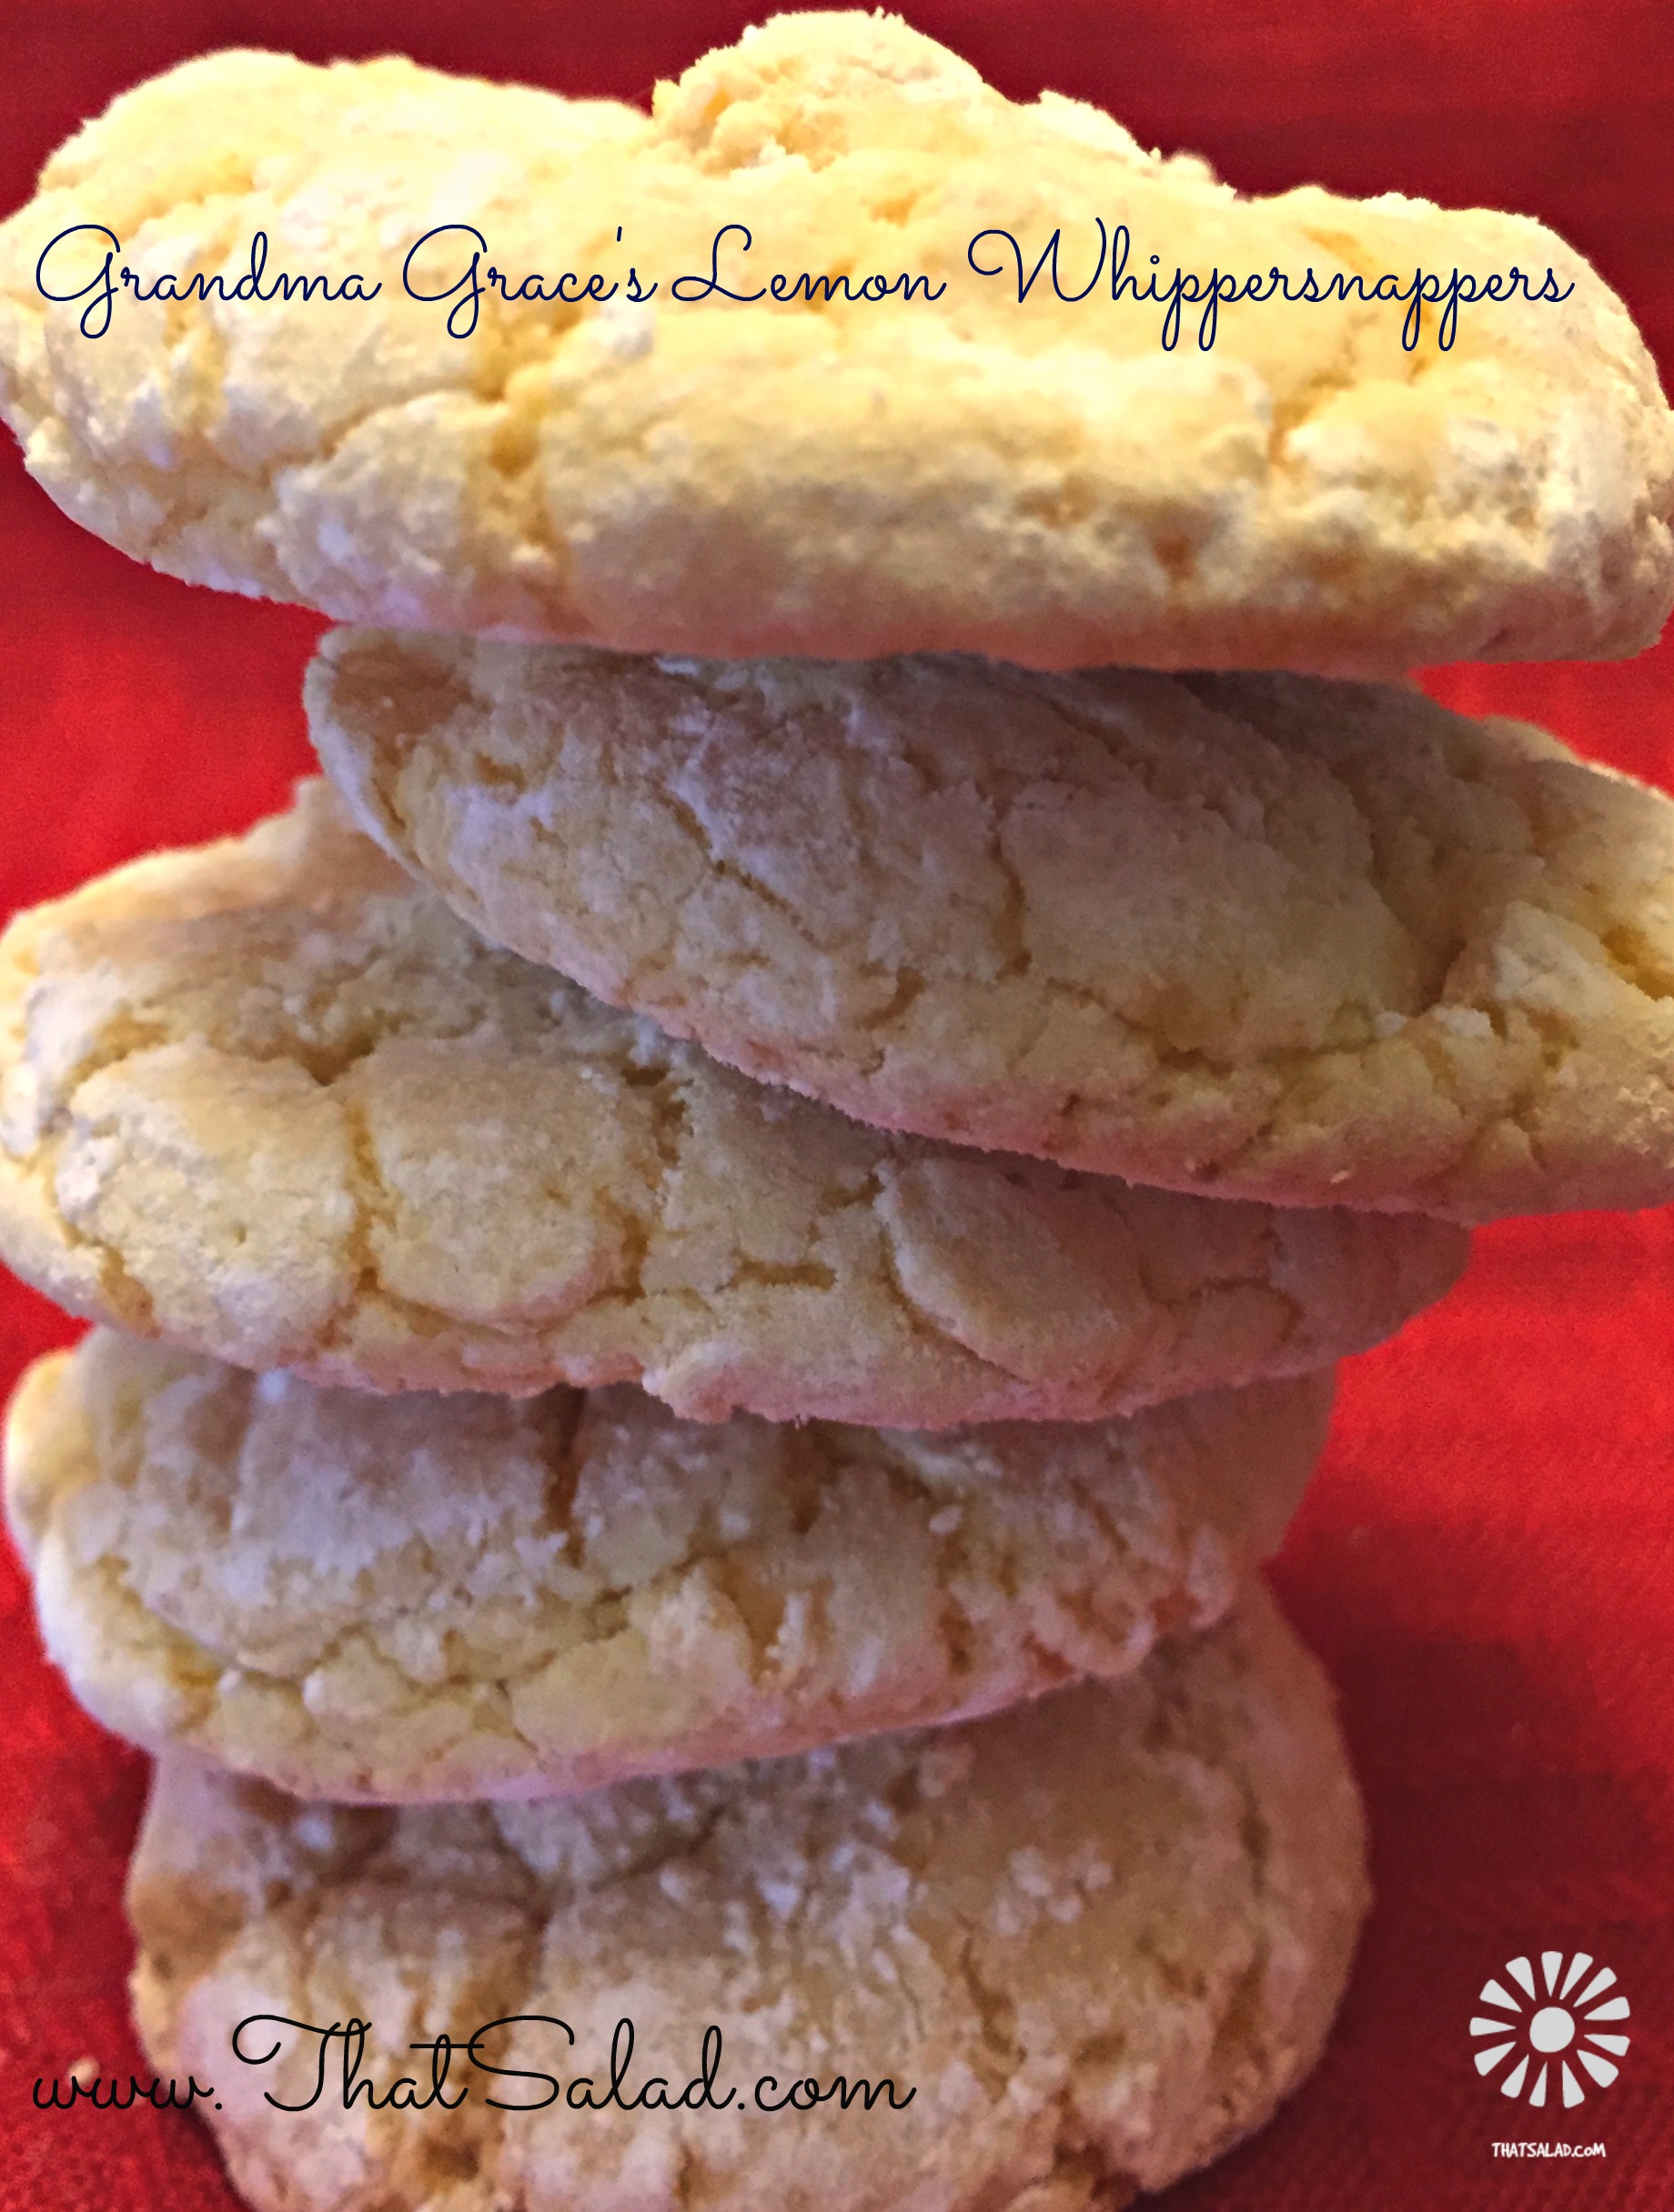 Lemon cookies with powdered sugar. A great Christmas treat!